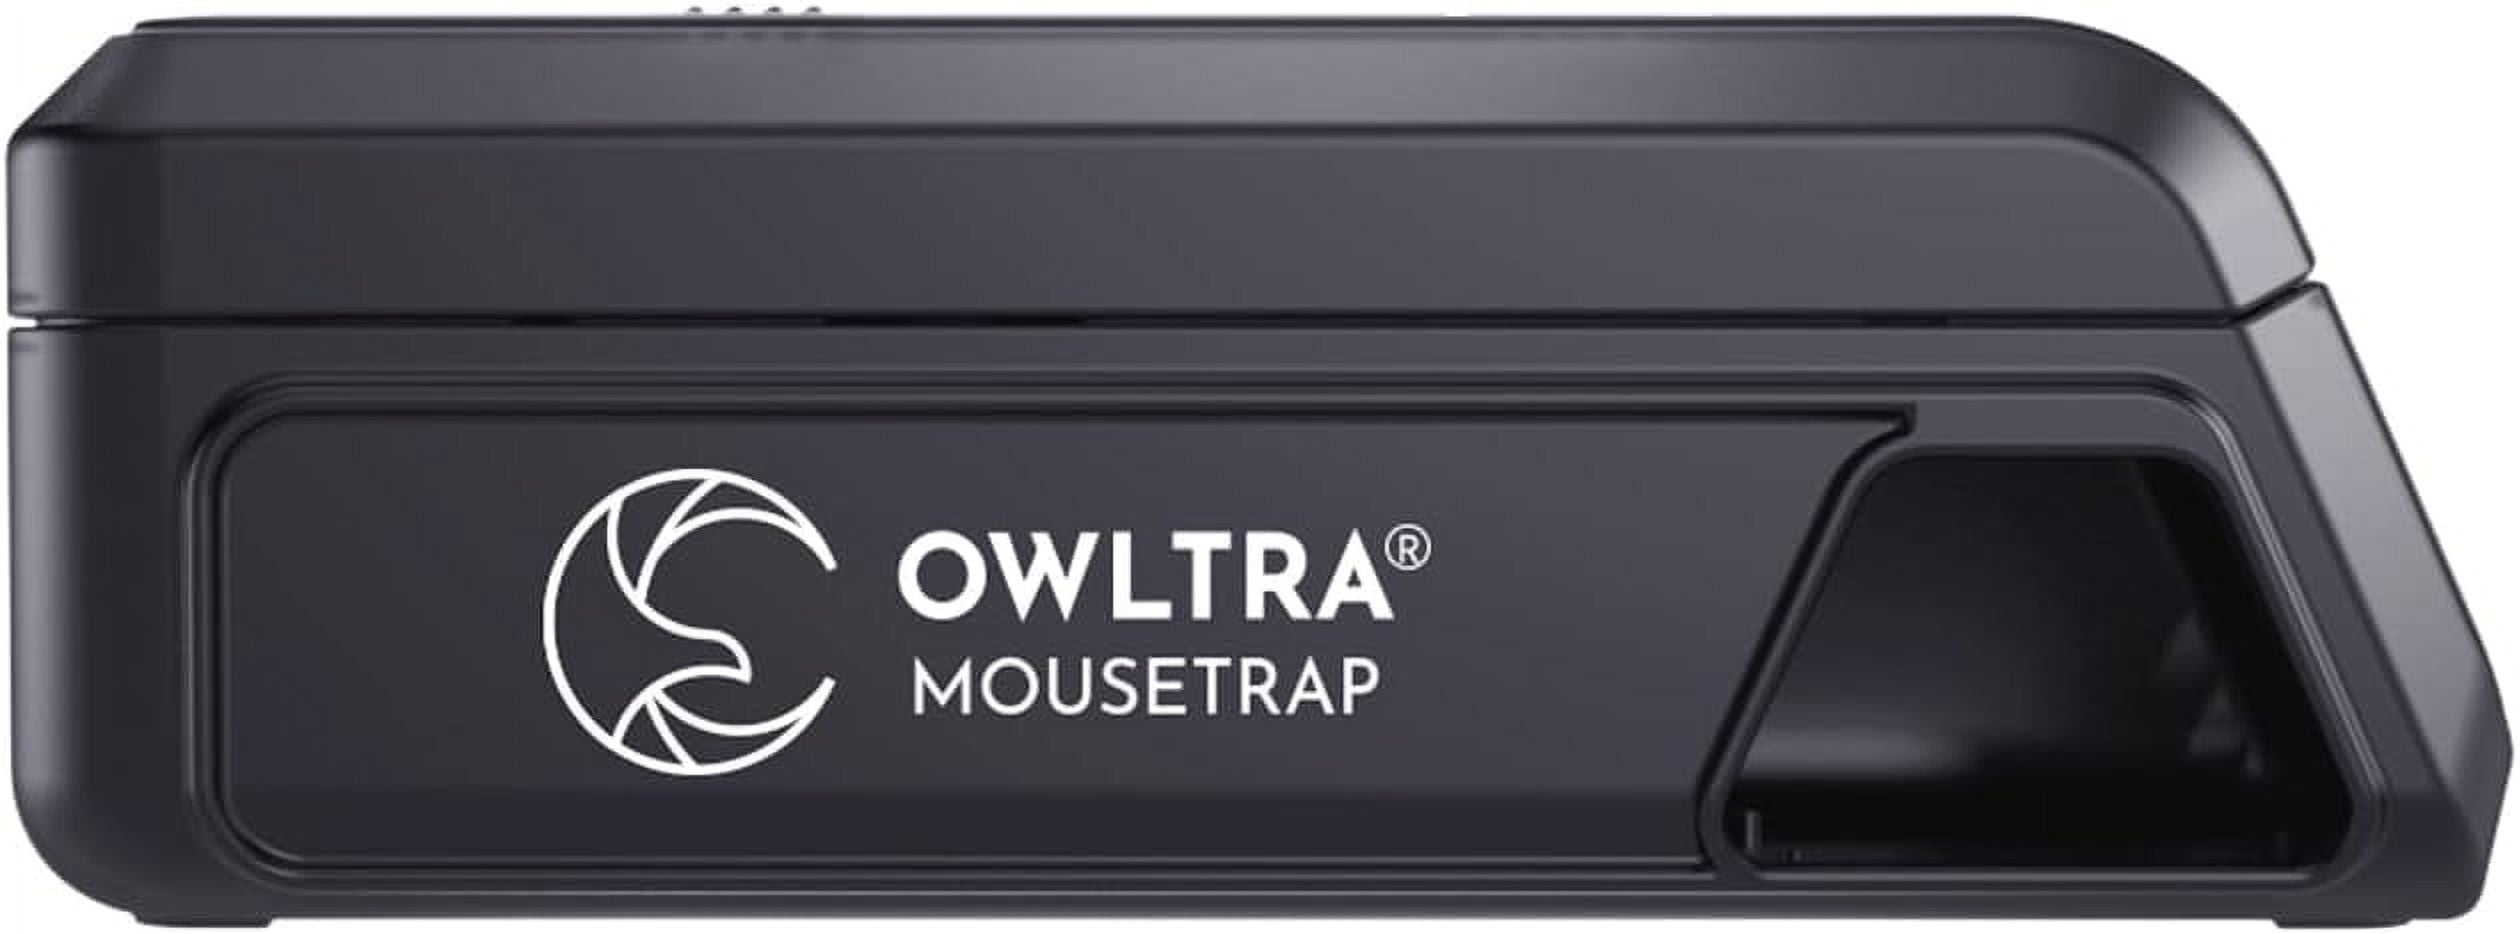 OWLTRA OW-1 Indoor Electric Rat Trap, Instant Kill Rodent Zapper with Pet  Safe Trigger, Black, Large